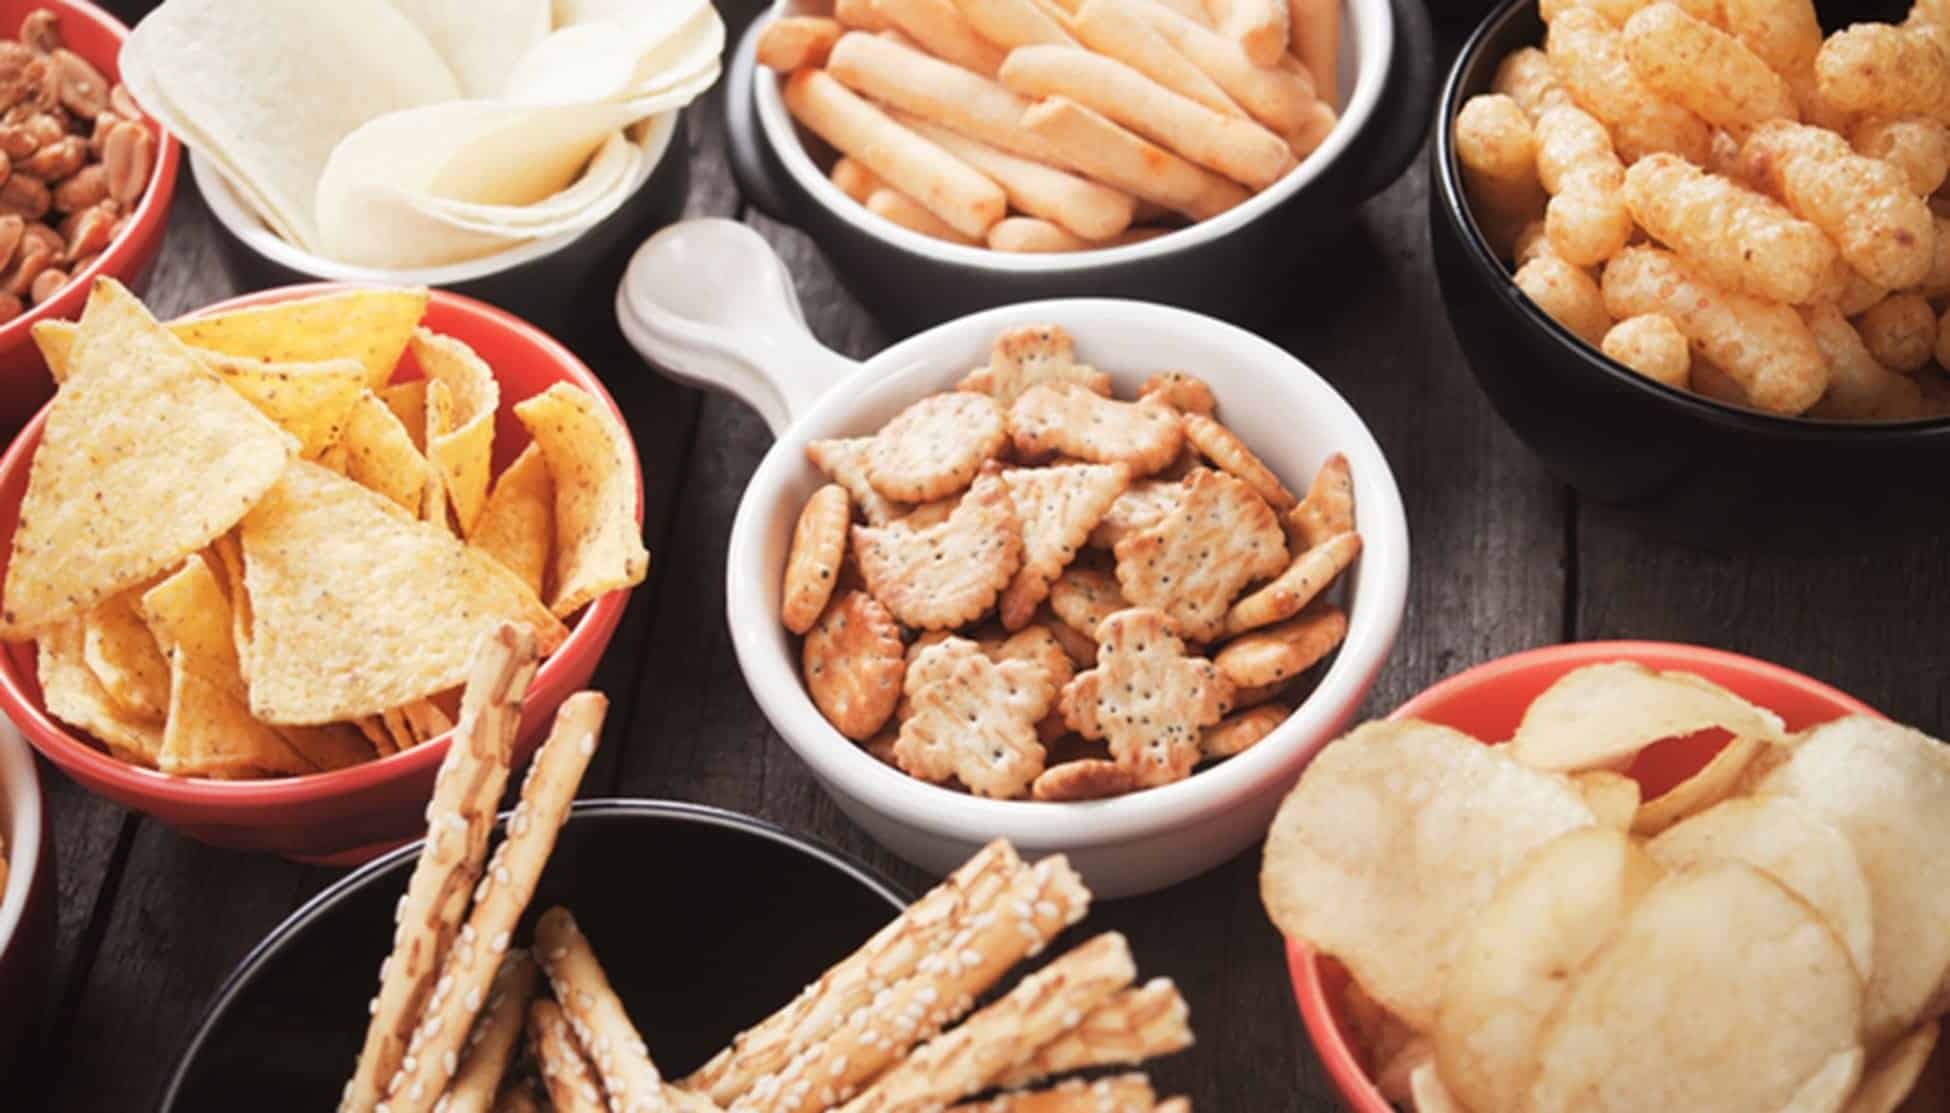 What Are the Different Kinds of Snack Foods? - Cablevey Conveyors